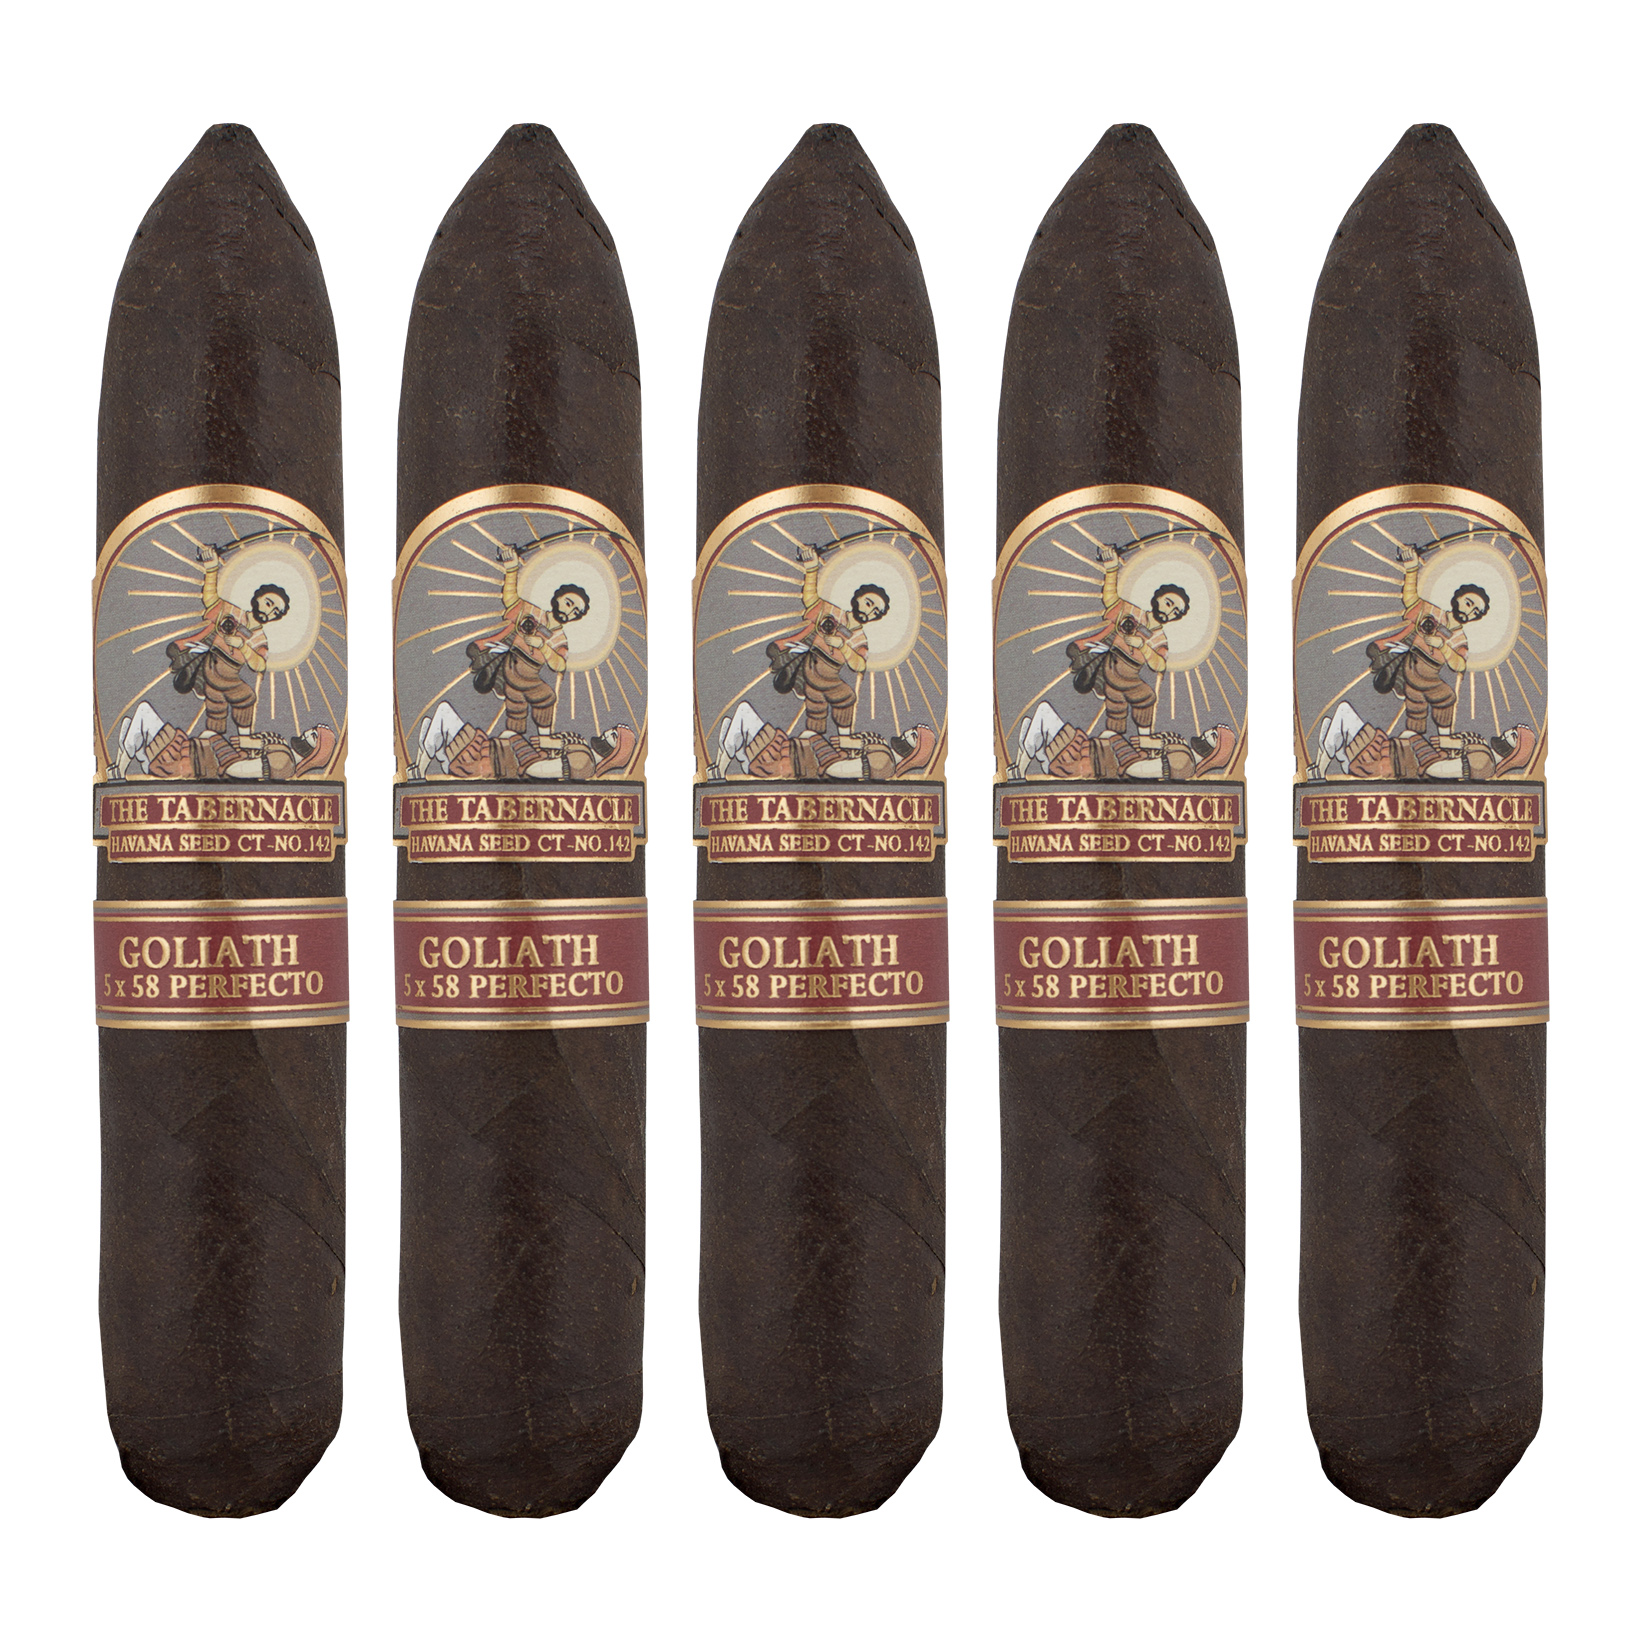 The Tabernacle Havana Seed Goliath Perfecto Cigar - 5 Pack